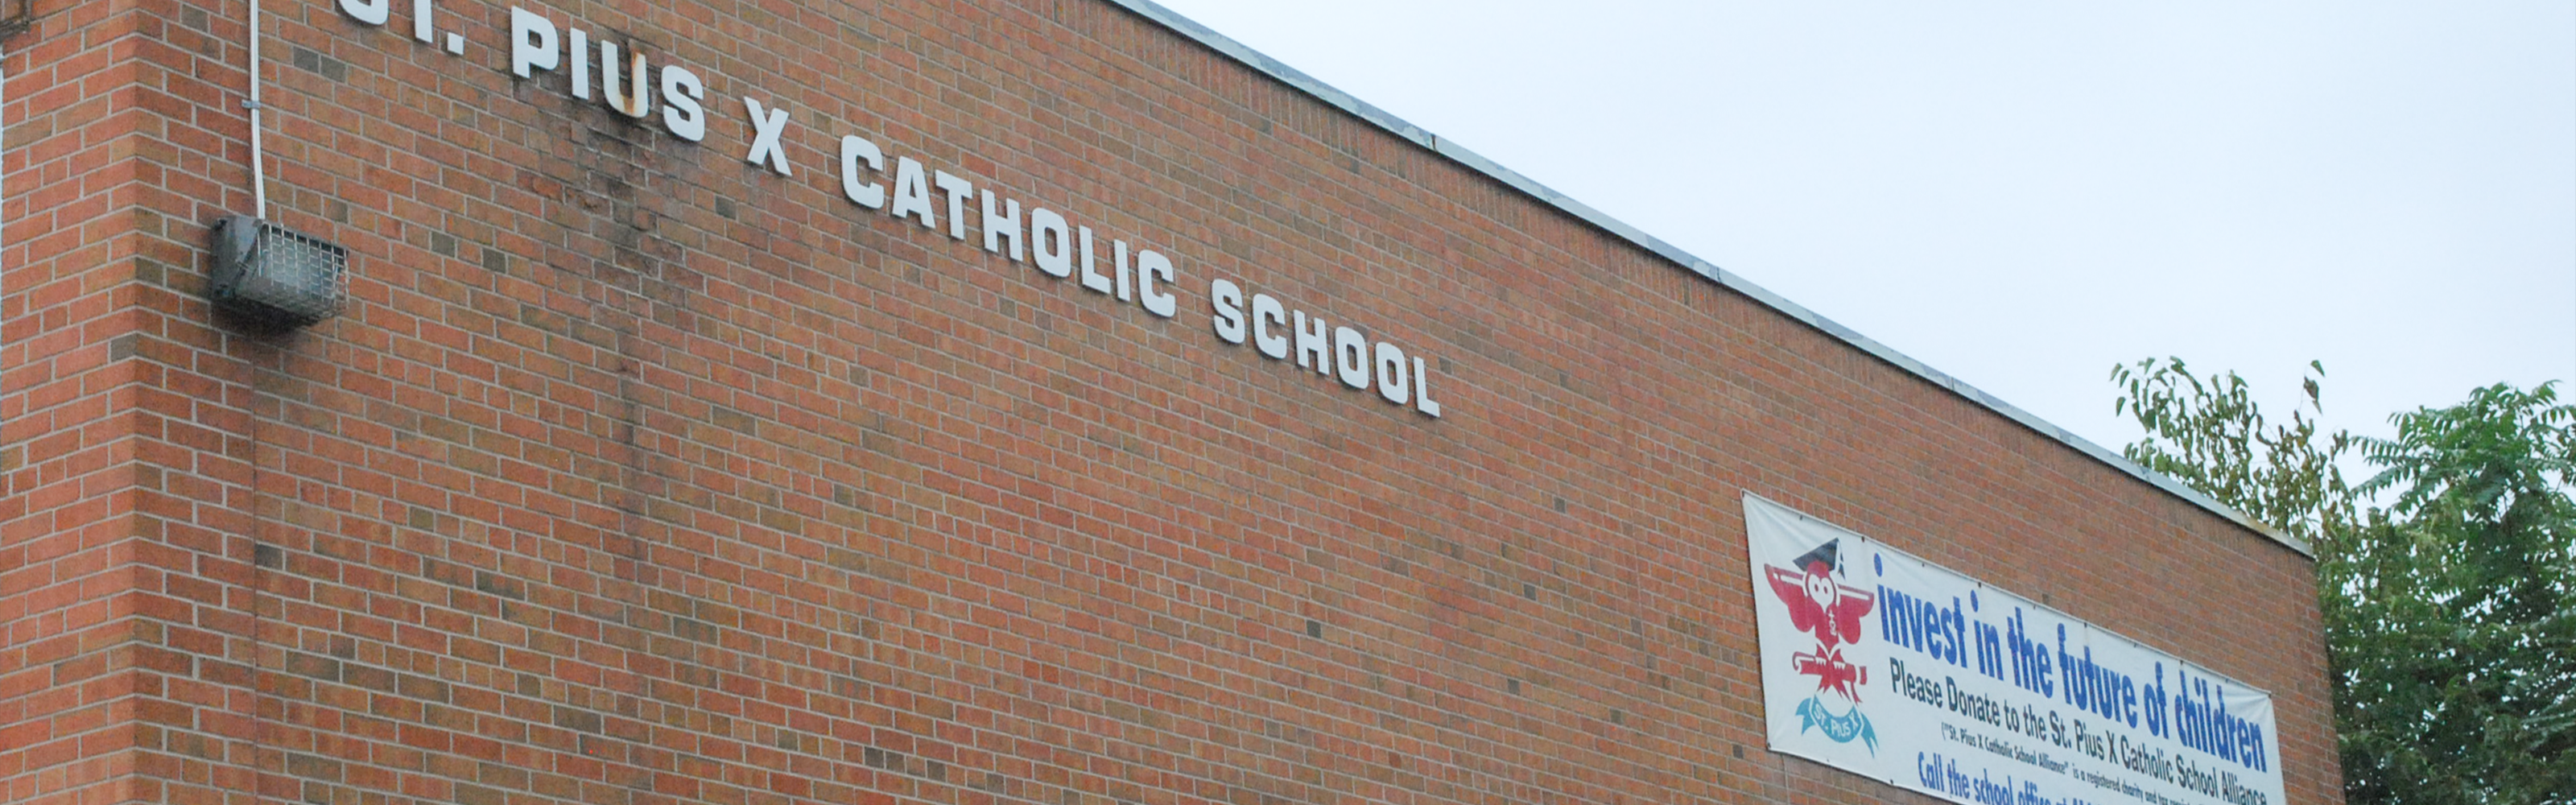 The front of the St. Pius X Catholic School building.